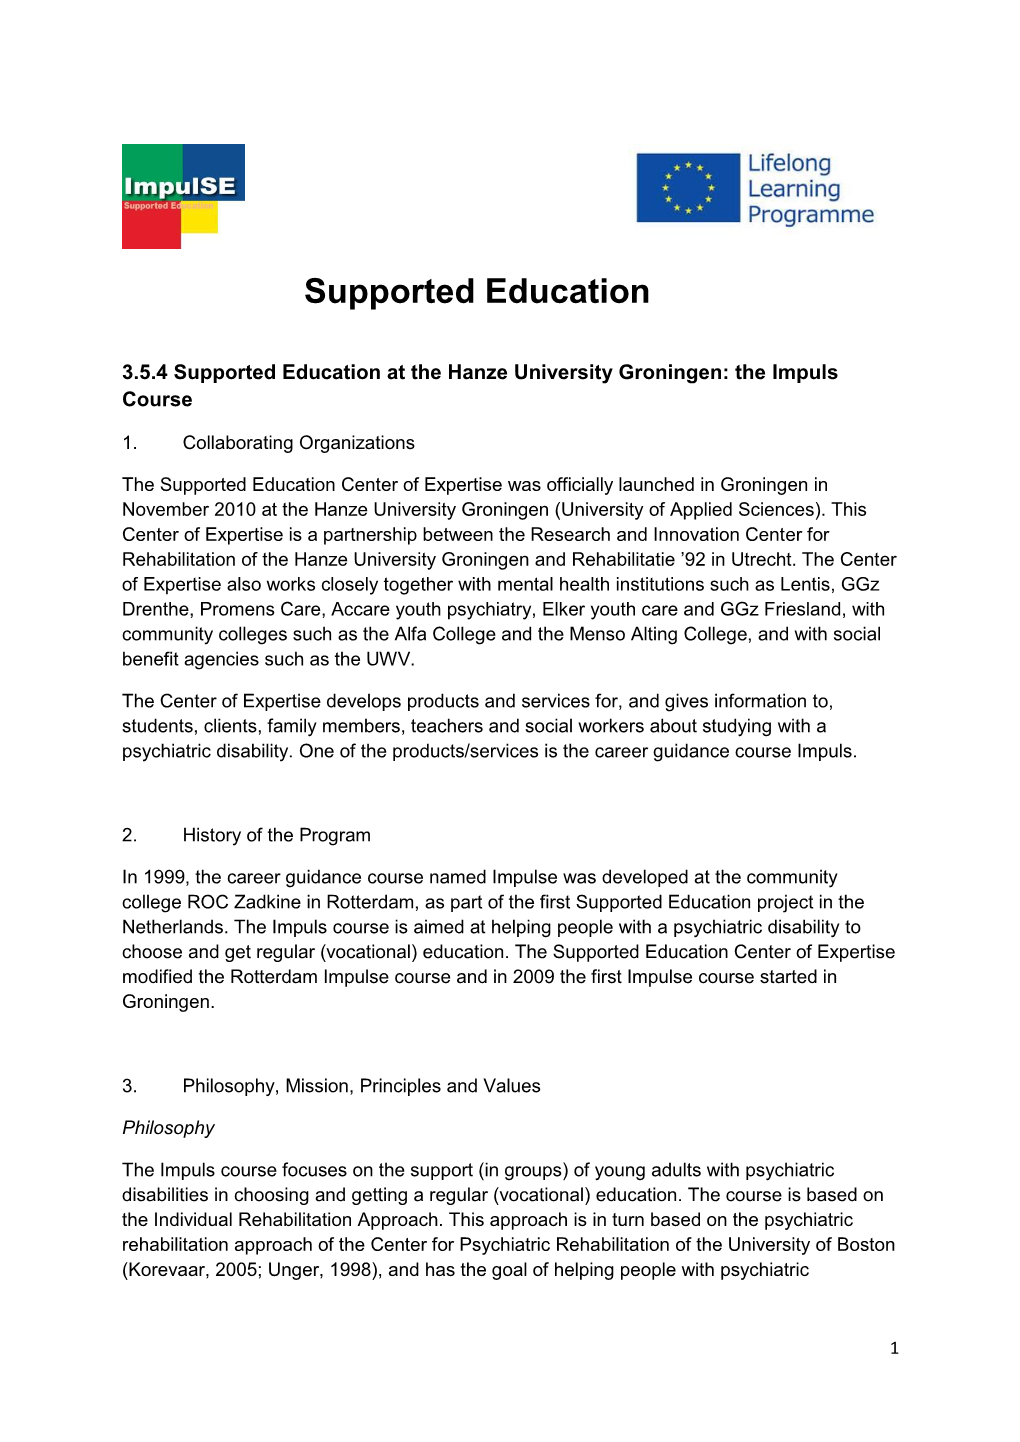 3.5.4 Supported Education at the Hanze University Groningen: the Impuls Course